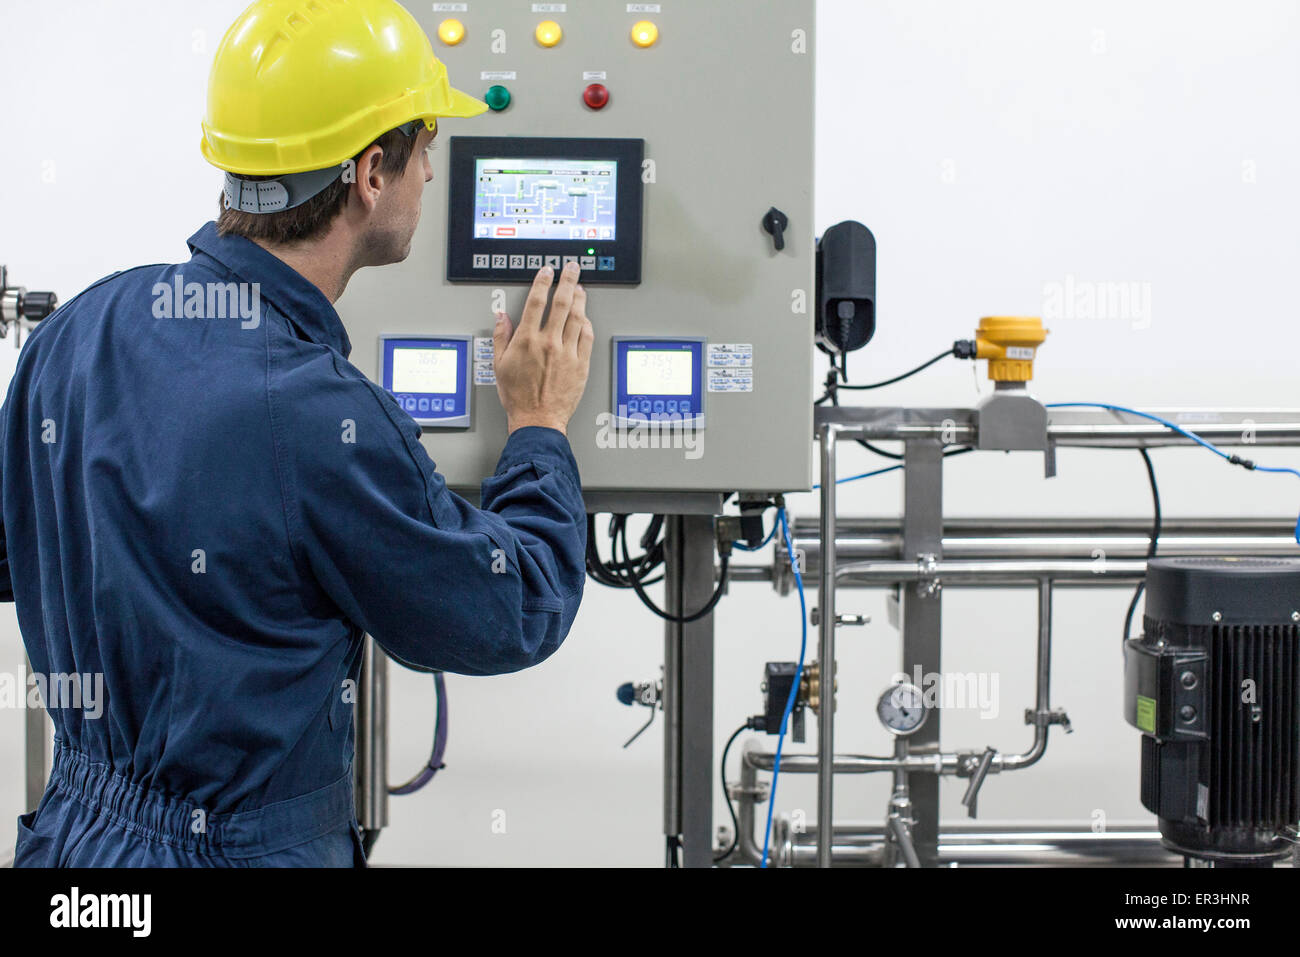 Skilled worker operating industrial equipment Stock Photo